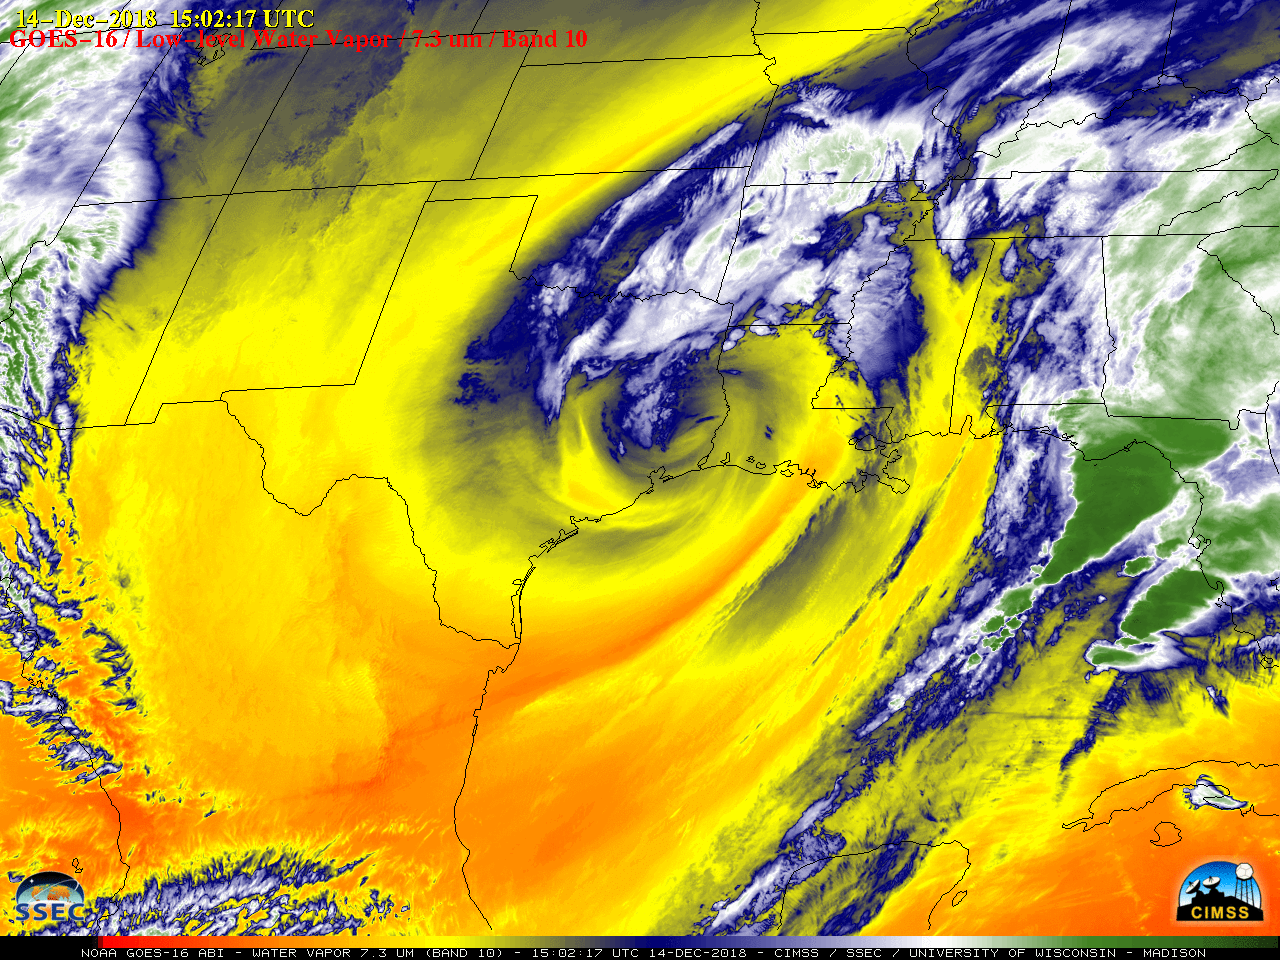 GOES-16 Low-level Water Vapor (7.3 µm) images, 13-15 December [click to play MP4 animation]